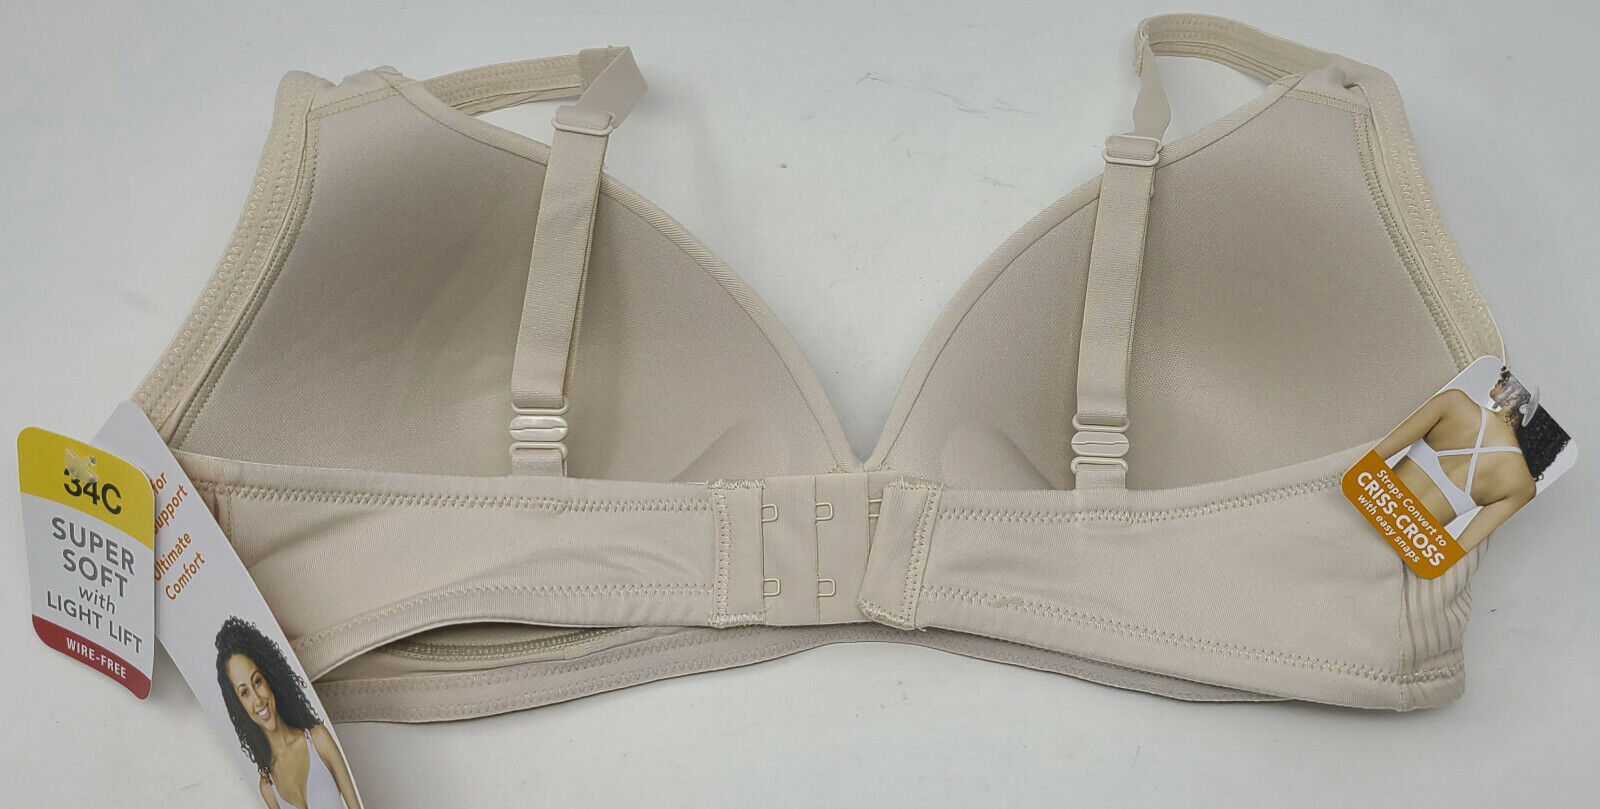 https://calebstreasures.com/wp-content/uploads/imported/8/Simply-Perfect-by-Warners-LIGHT-LIFT-SUPER-SOFT-WIREFREE-BRA-Butterscotch-34C-203889501918-2.jpg